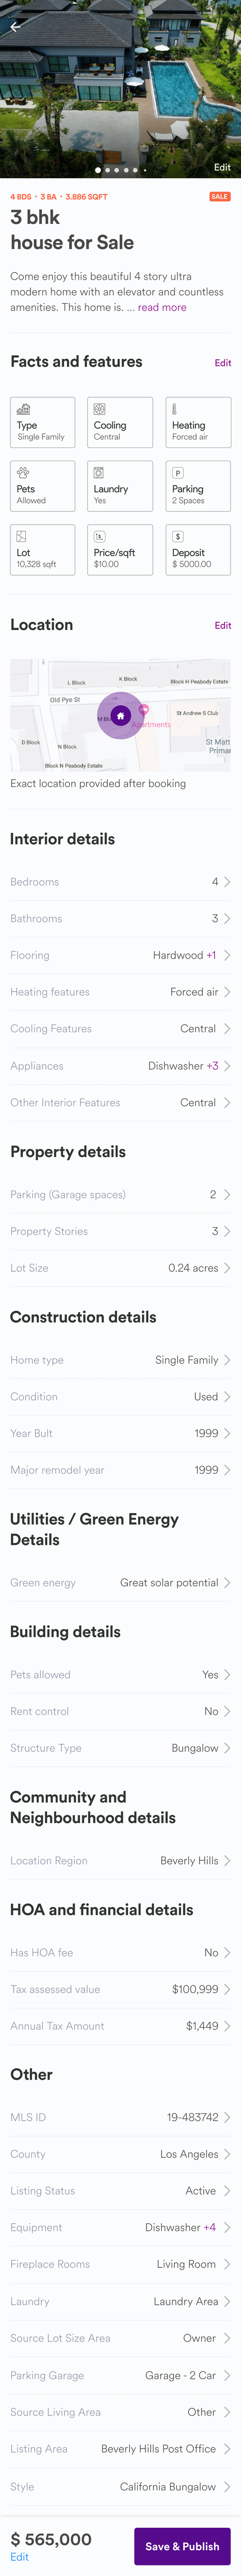 Build a Real Estate App That Scores Over & Above Zillow